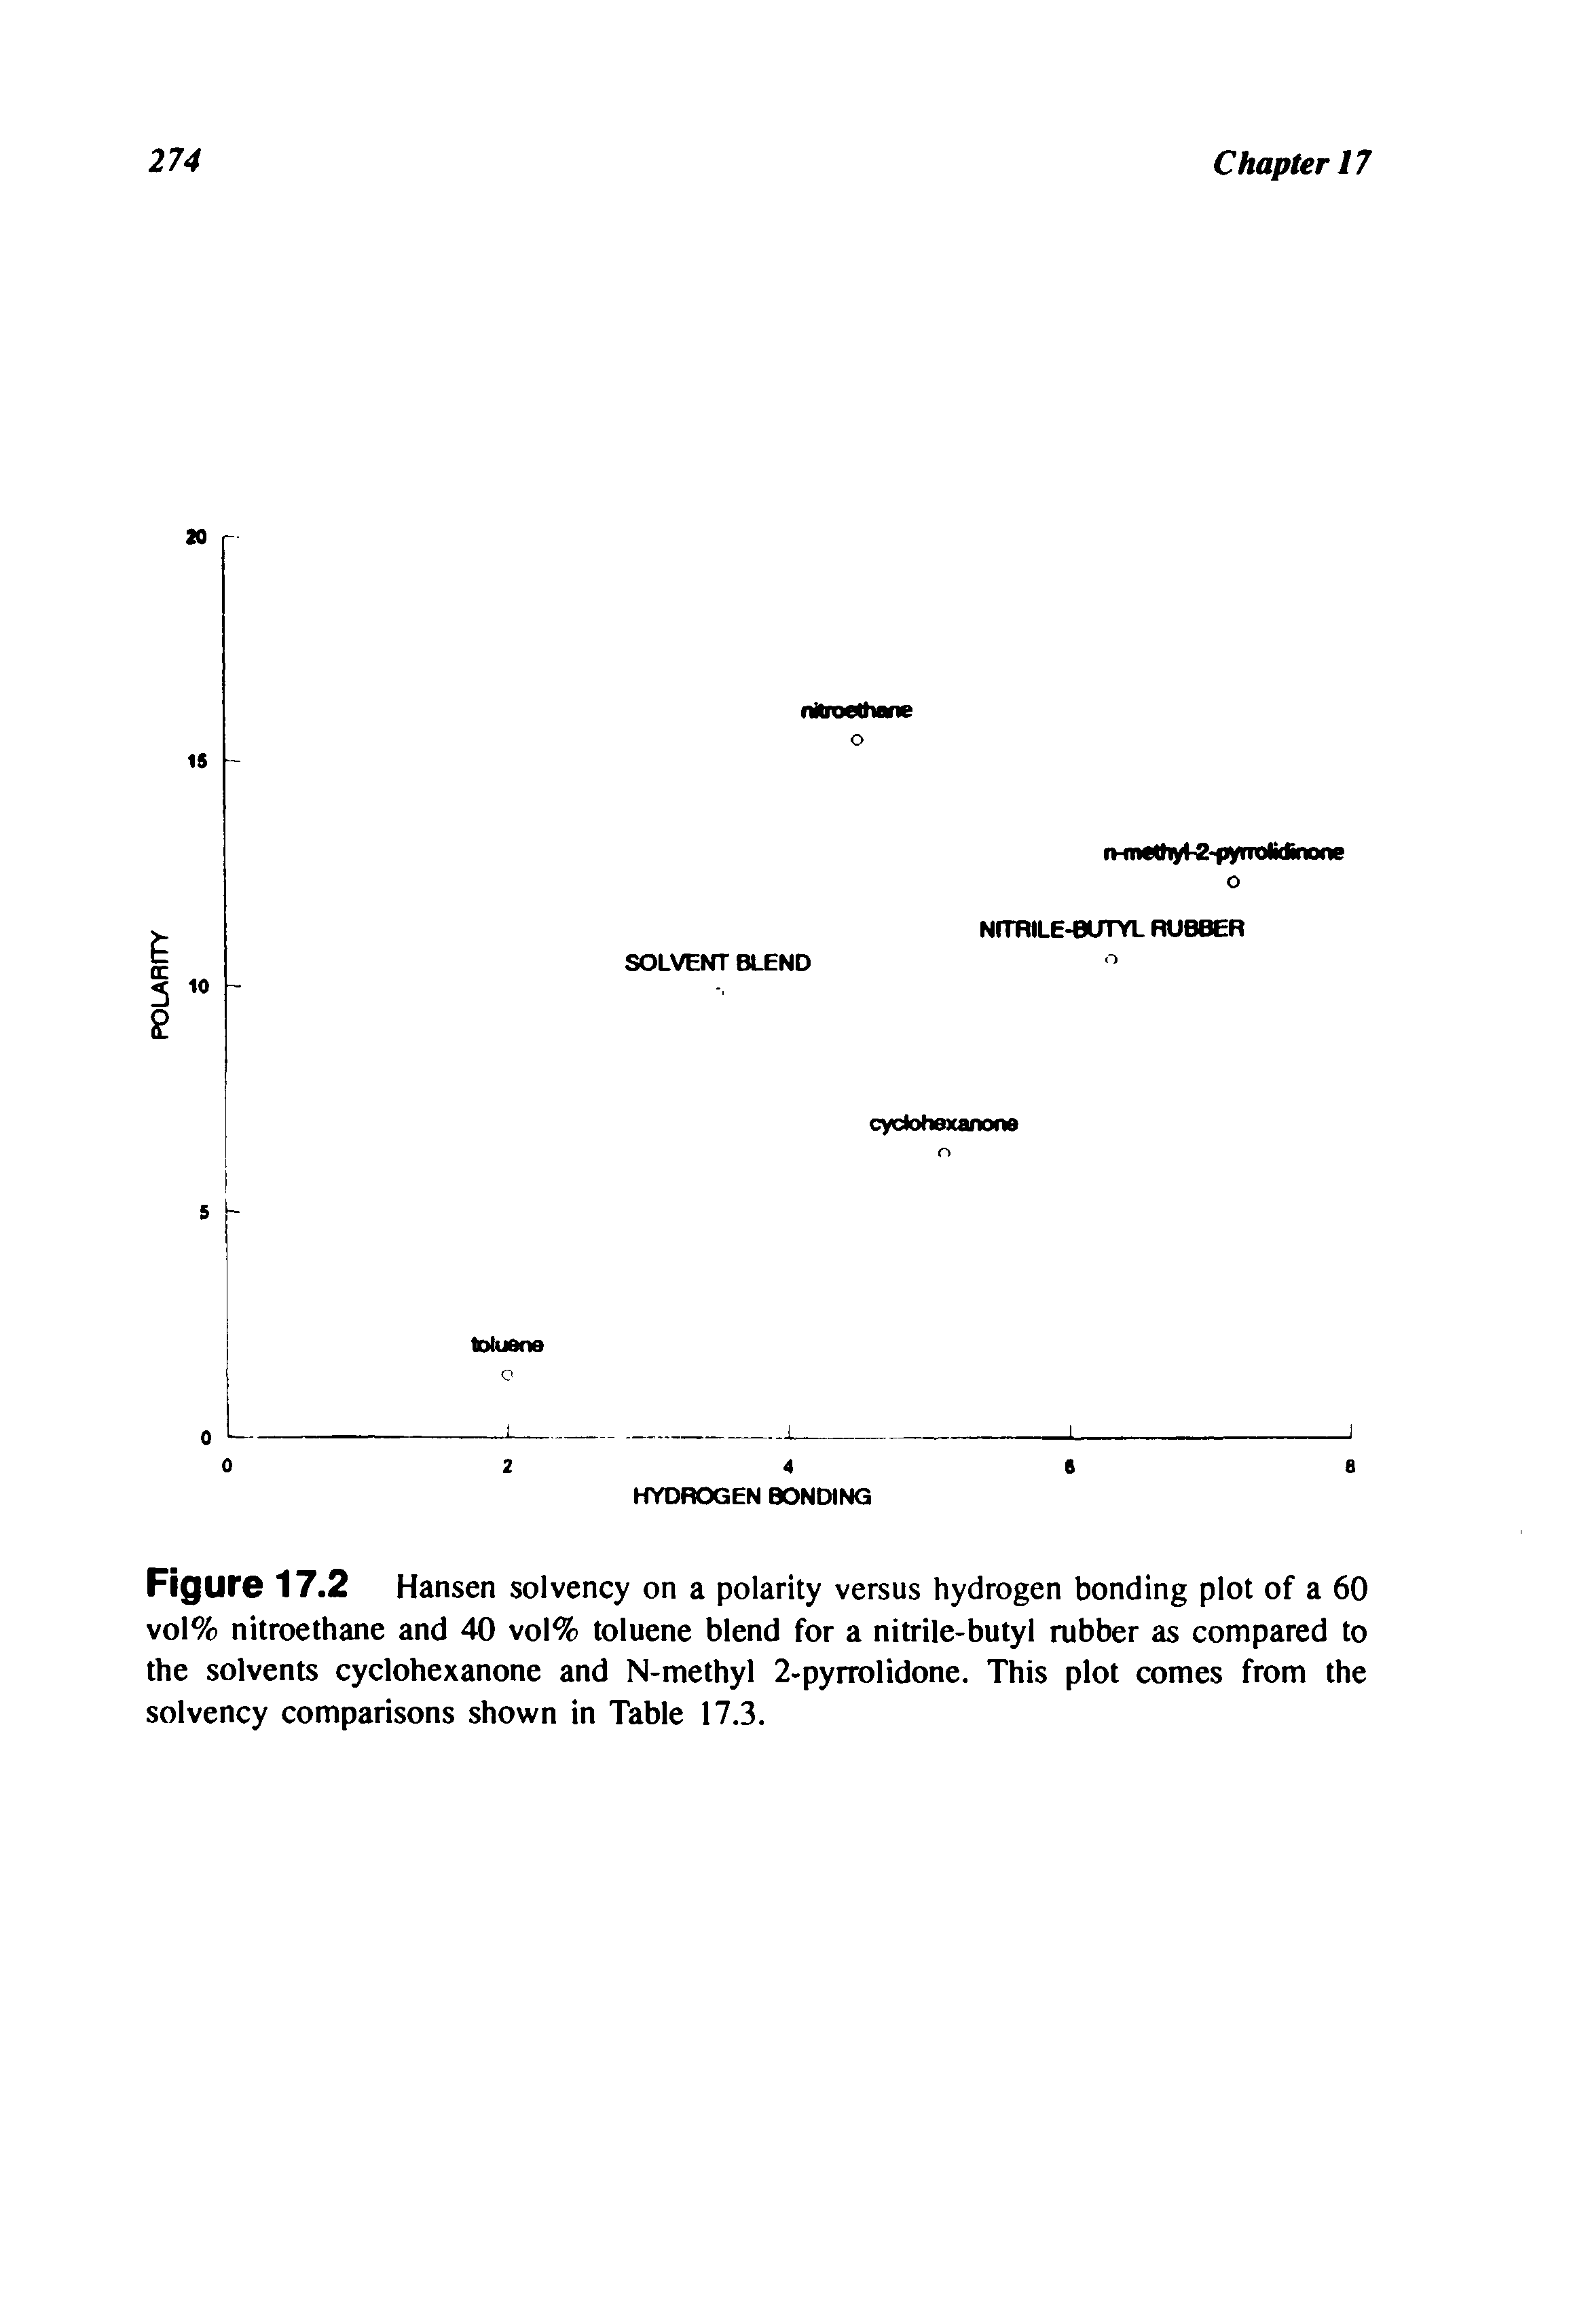 Figure 17.2 Hansen solvency on a polarity versus hydrogen bonding plot of a 60 vol% nitroethane and 40 vol% toluene blend for a nitrile-butyl rubber as compared to the solvents cyclohexanone and N-methyl 2-pyrrolidone. This plot comes from the solvency comparisons shown in Table 17.3.